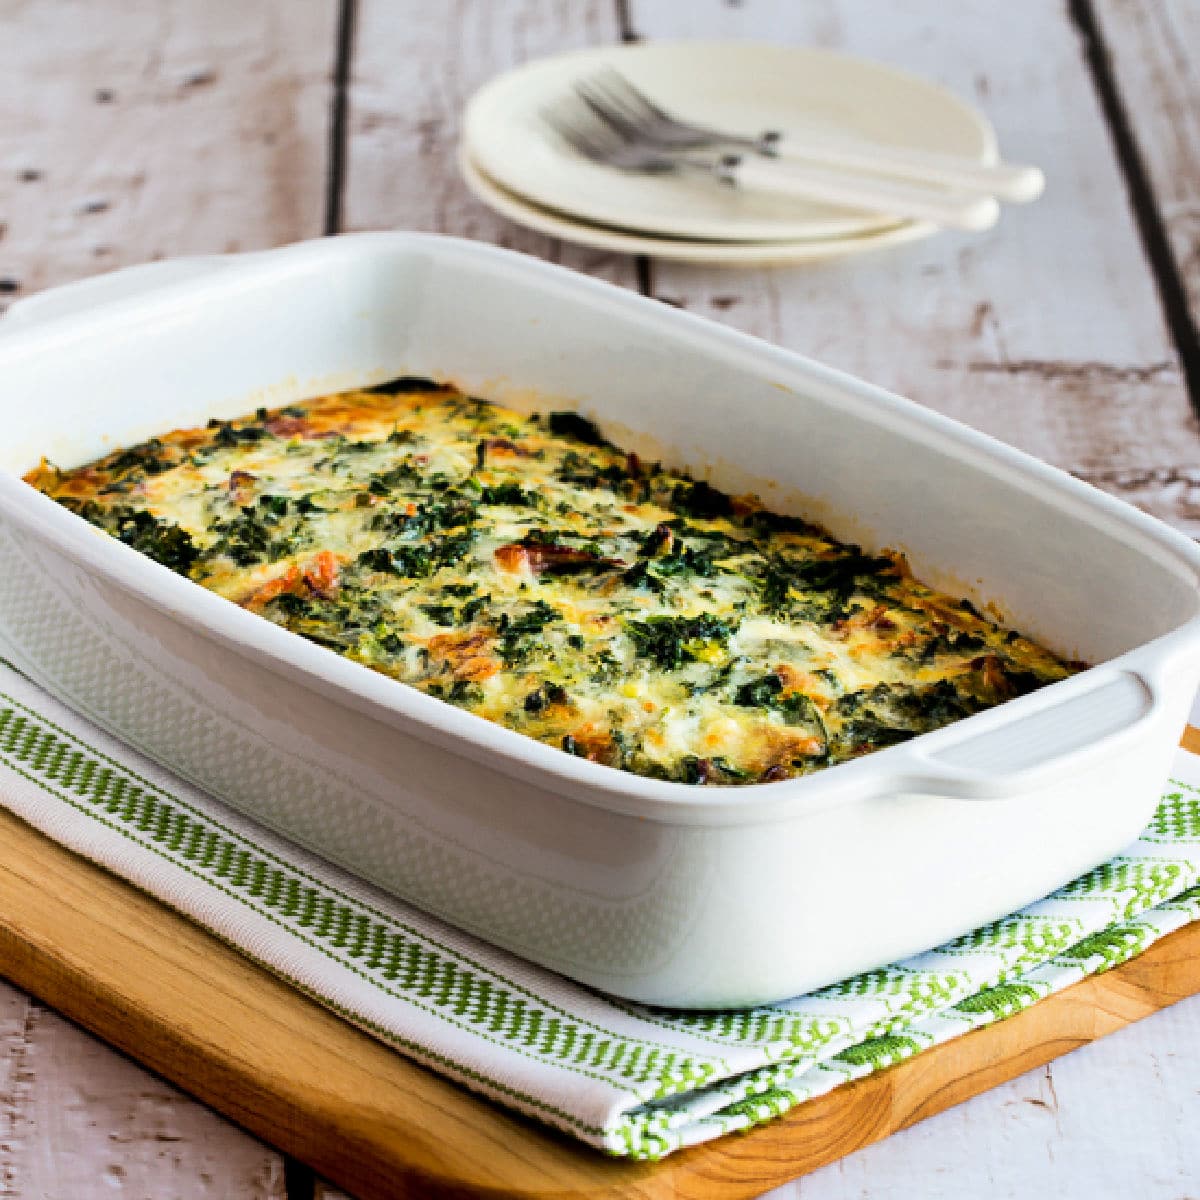 Square image for Kale, Bacon, and Cheese Breakfast Casserole shown in baking dish.